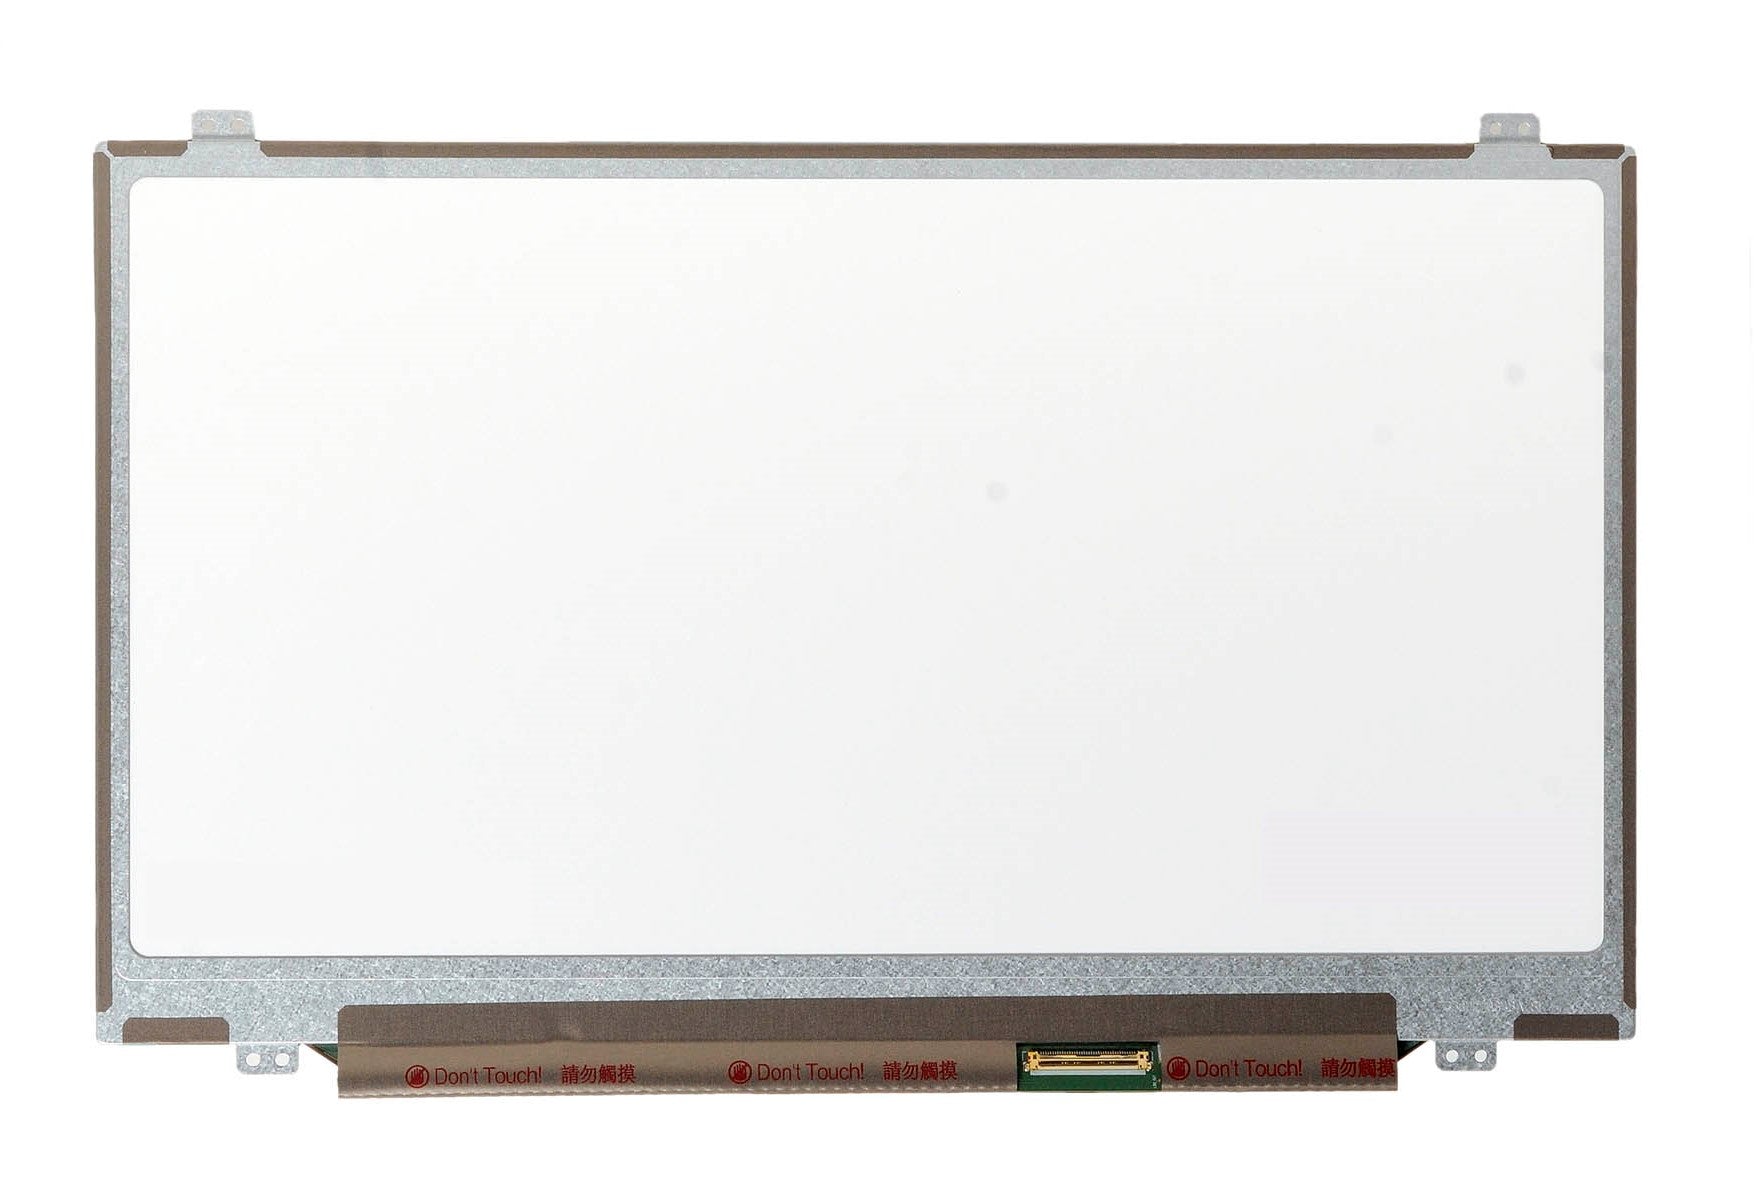 Replacement Screen For LTN140AT20 HD 1366x768 Glossy LCD LED Display